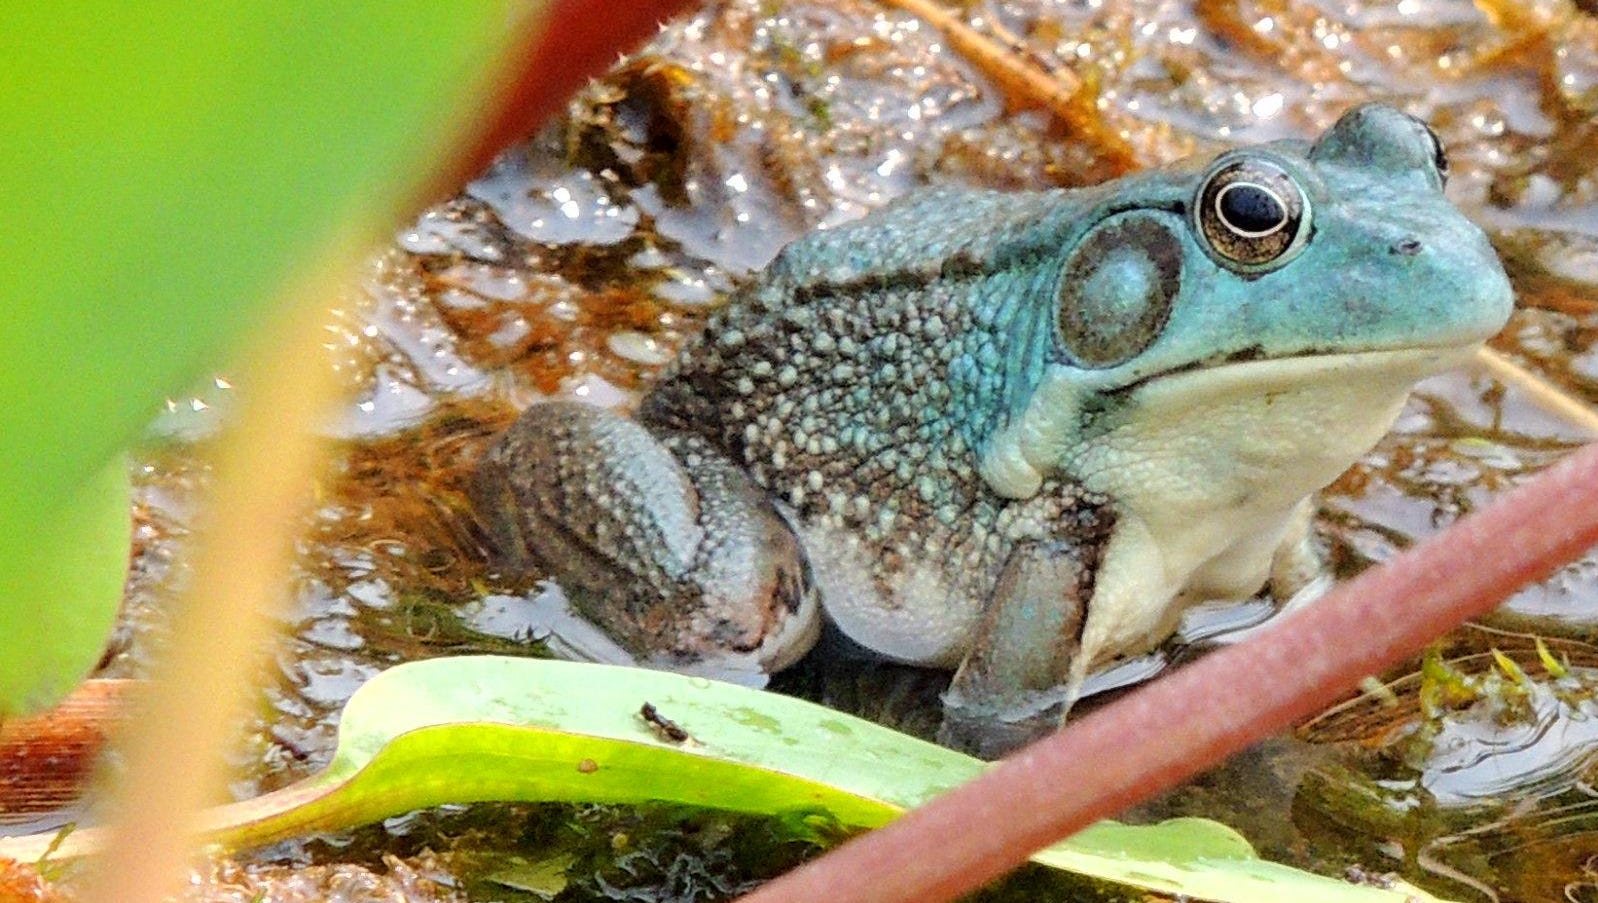 Blue frogs among summer’s colorful surprises